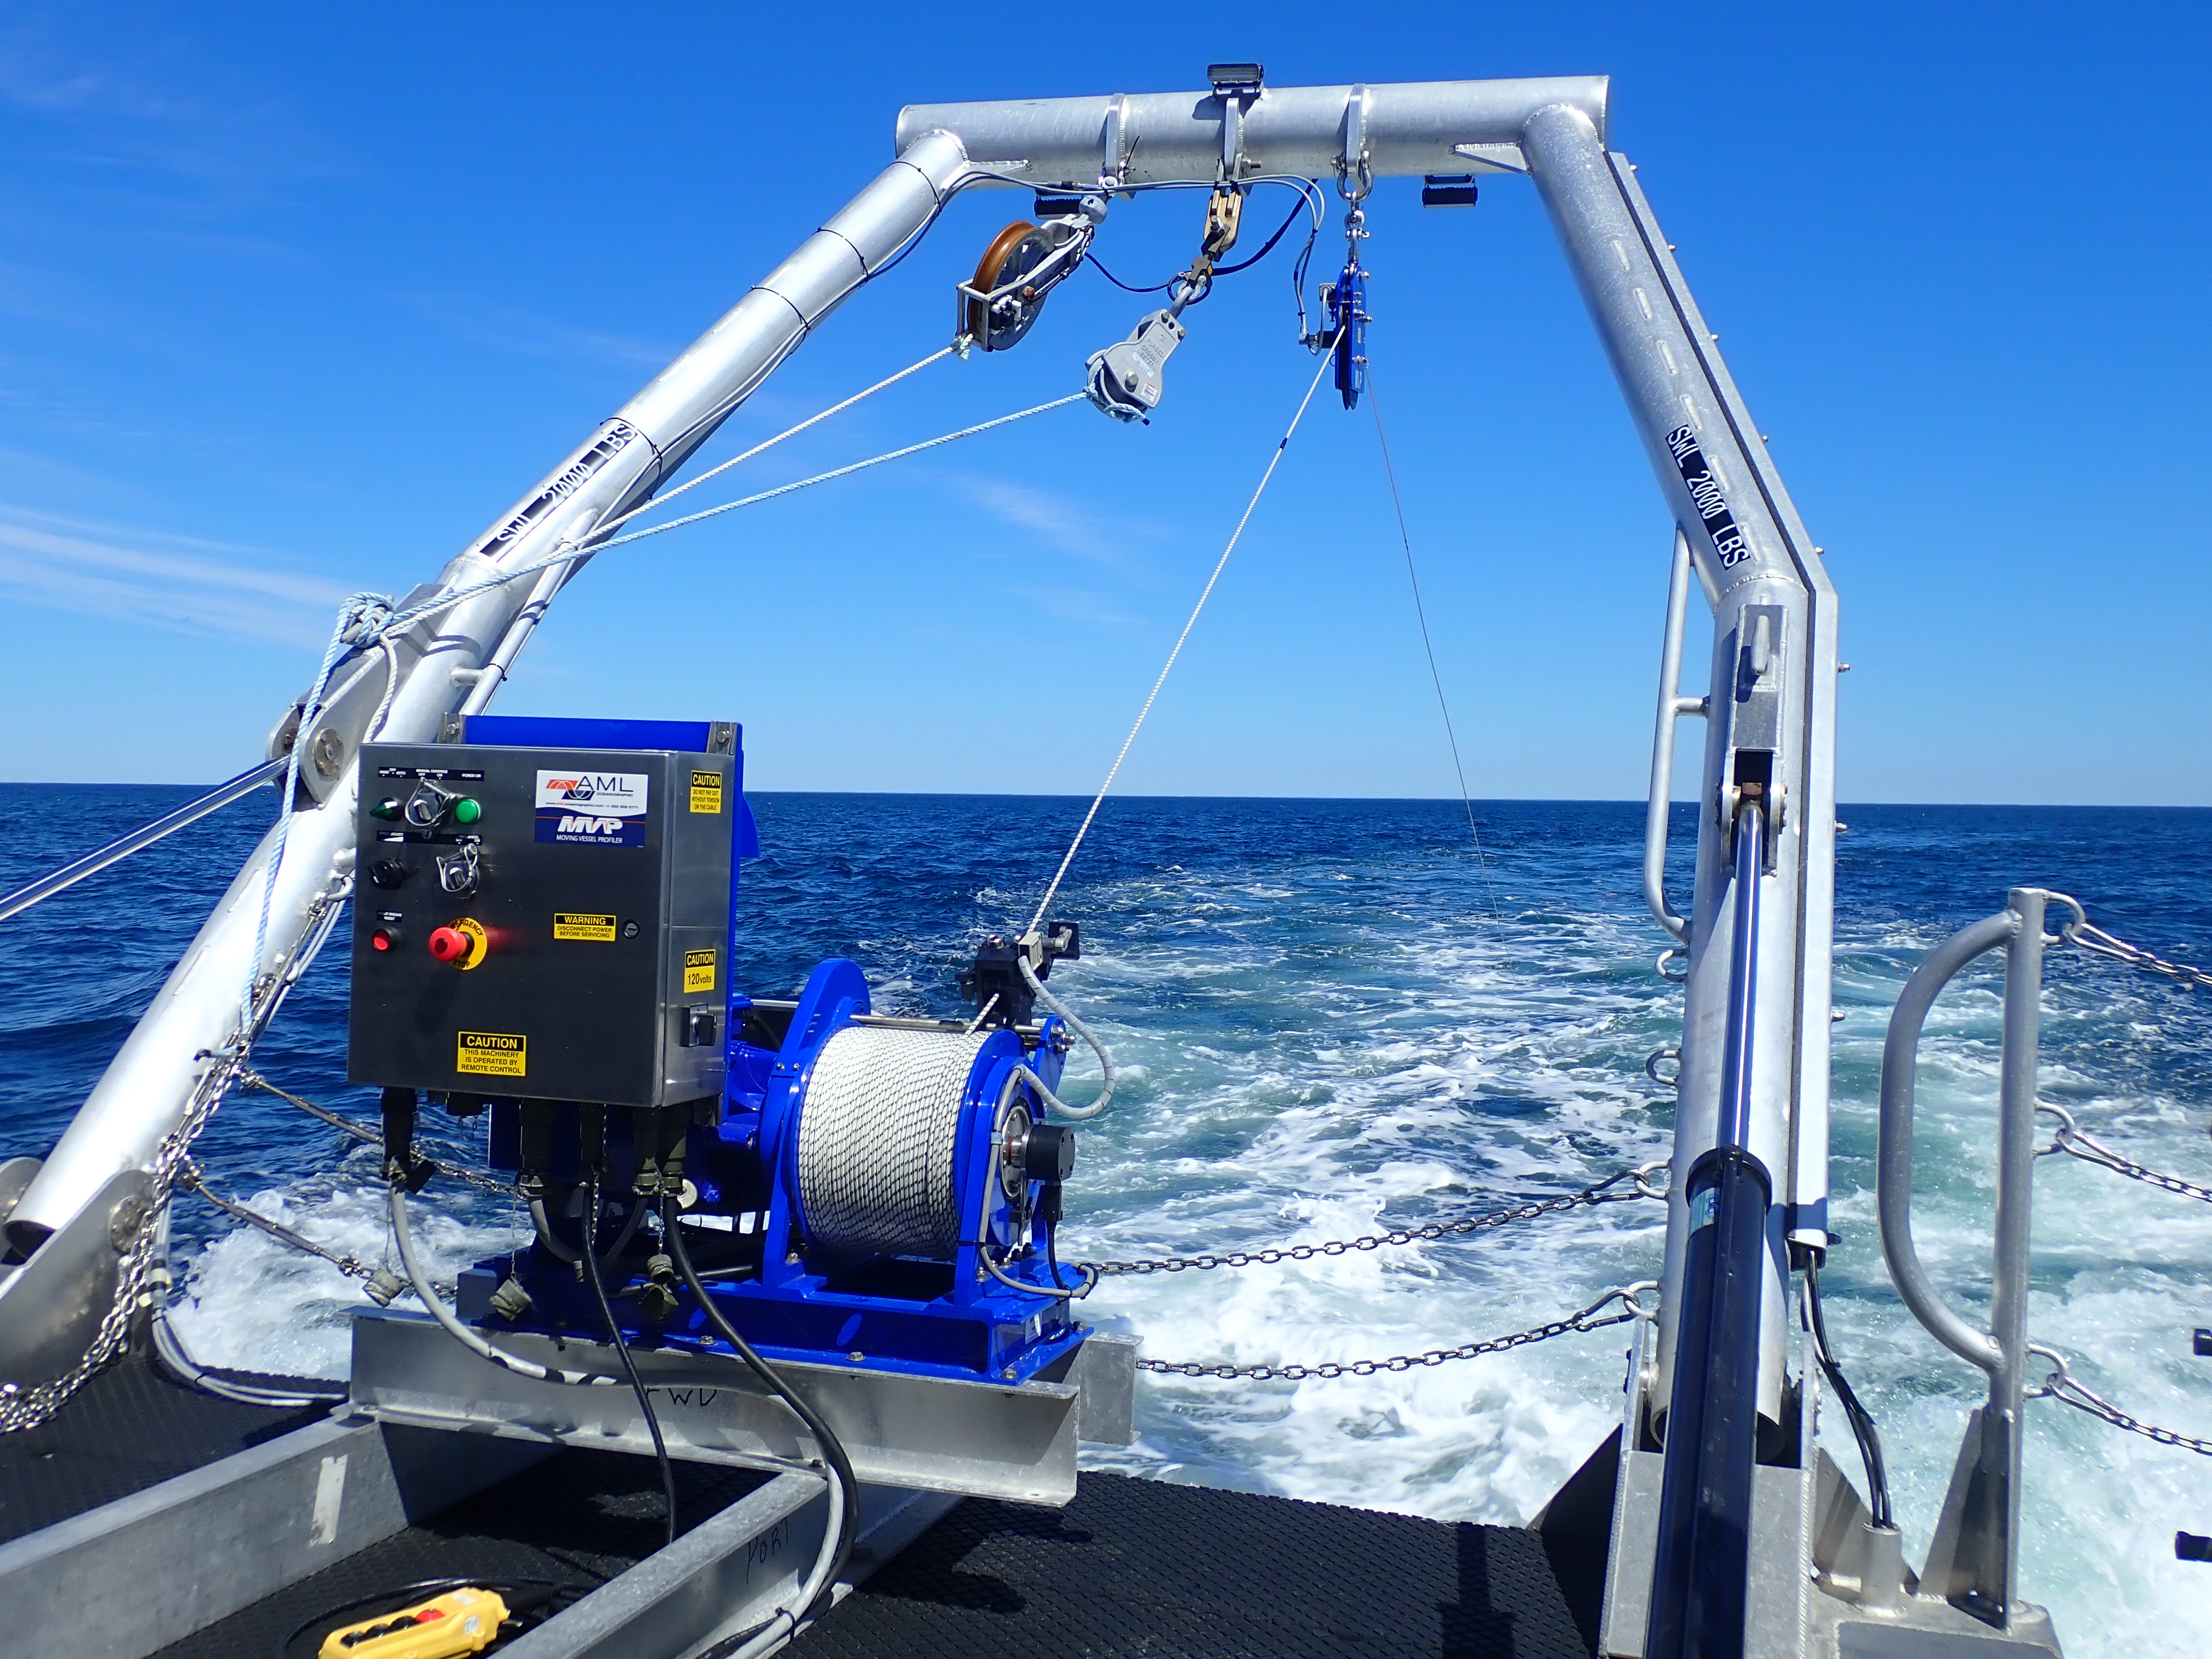 mvp30-350 on the open ocean collecting data